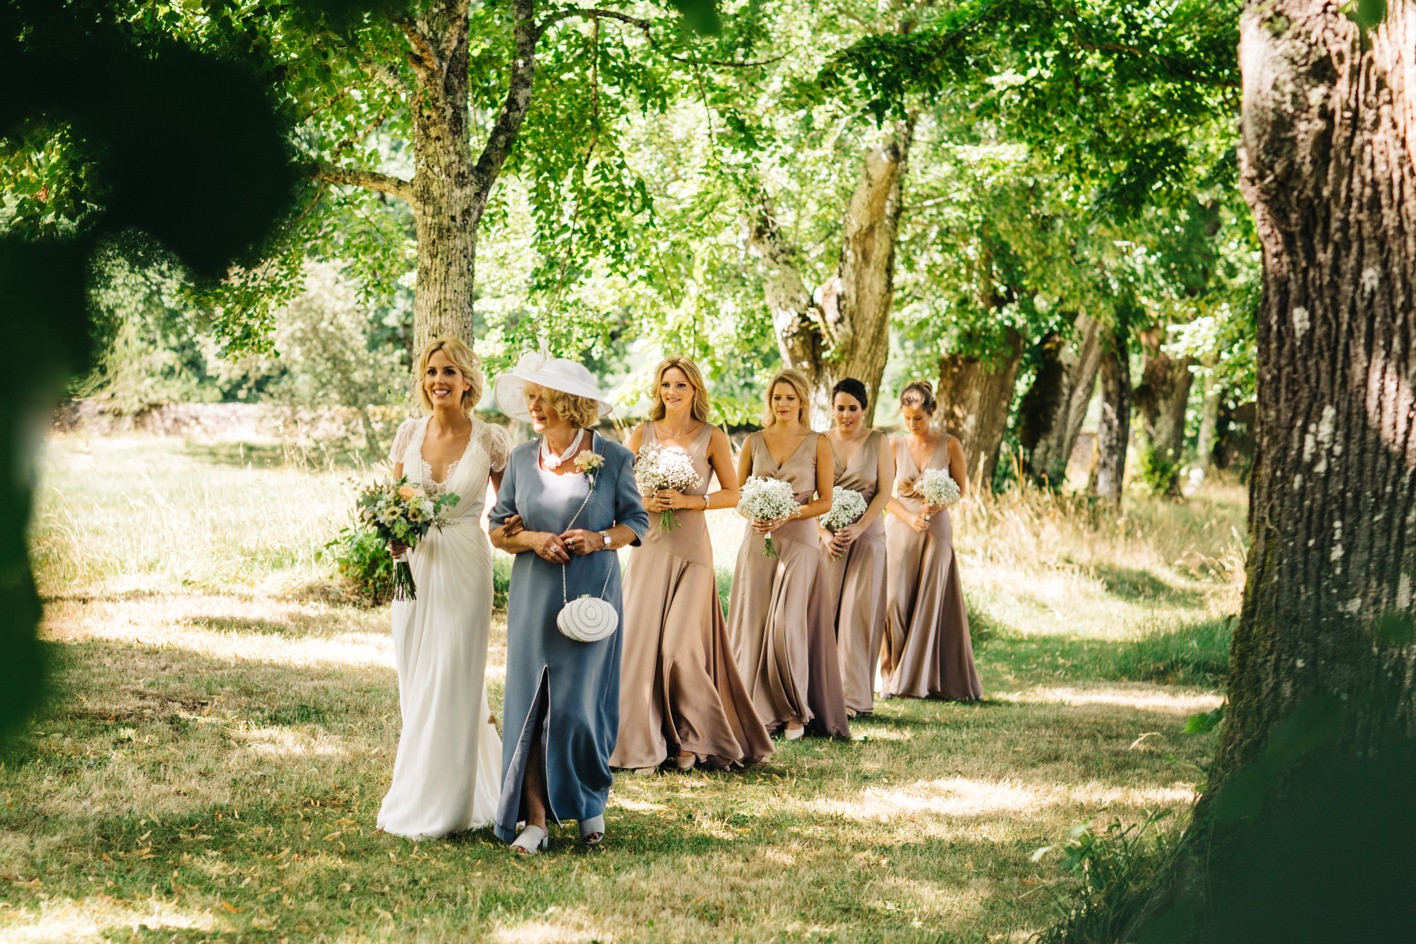 Bride leading walk with bridesmaids at wooden ceremony in France